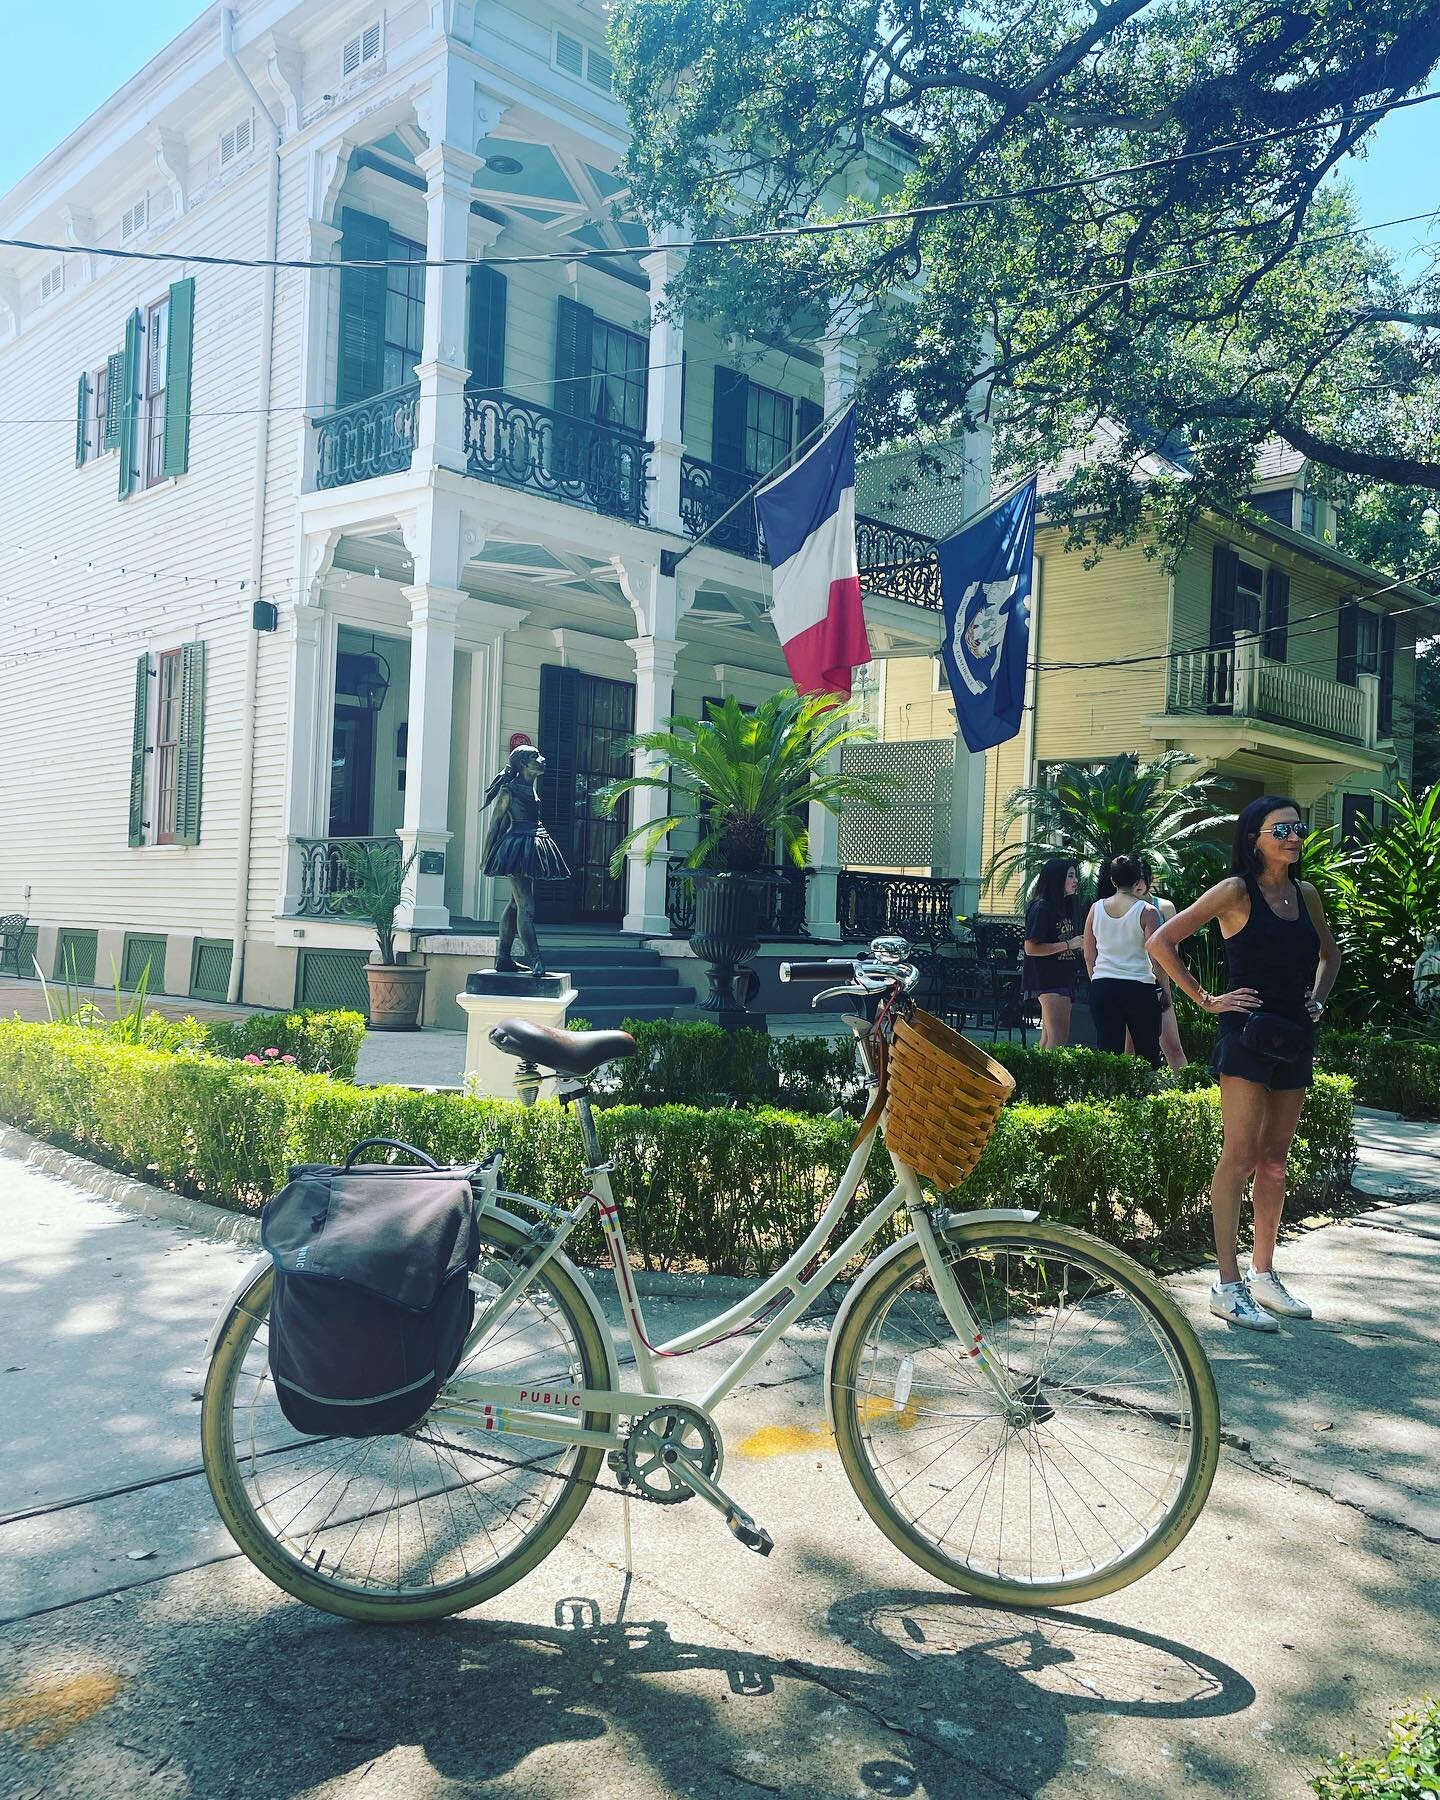 Stopped and had a nice chat with the curator of the Dega House on our Creole Odyssey tour today. If your an art lover putting a visit to the @degahousenola on your itinerary is a must. Thanks for the hospitality and cookies David!!! #creoleodyssey #m